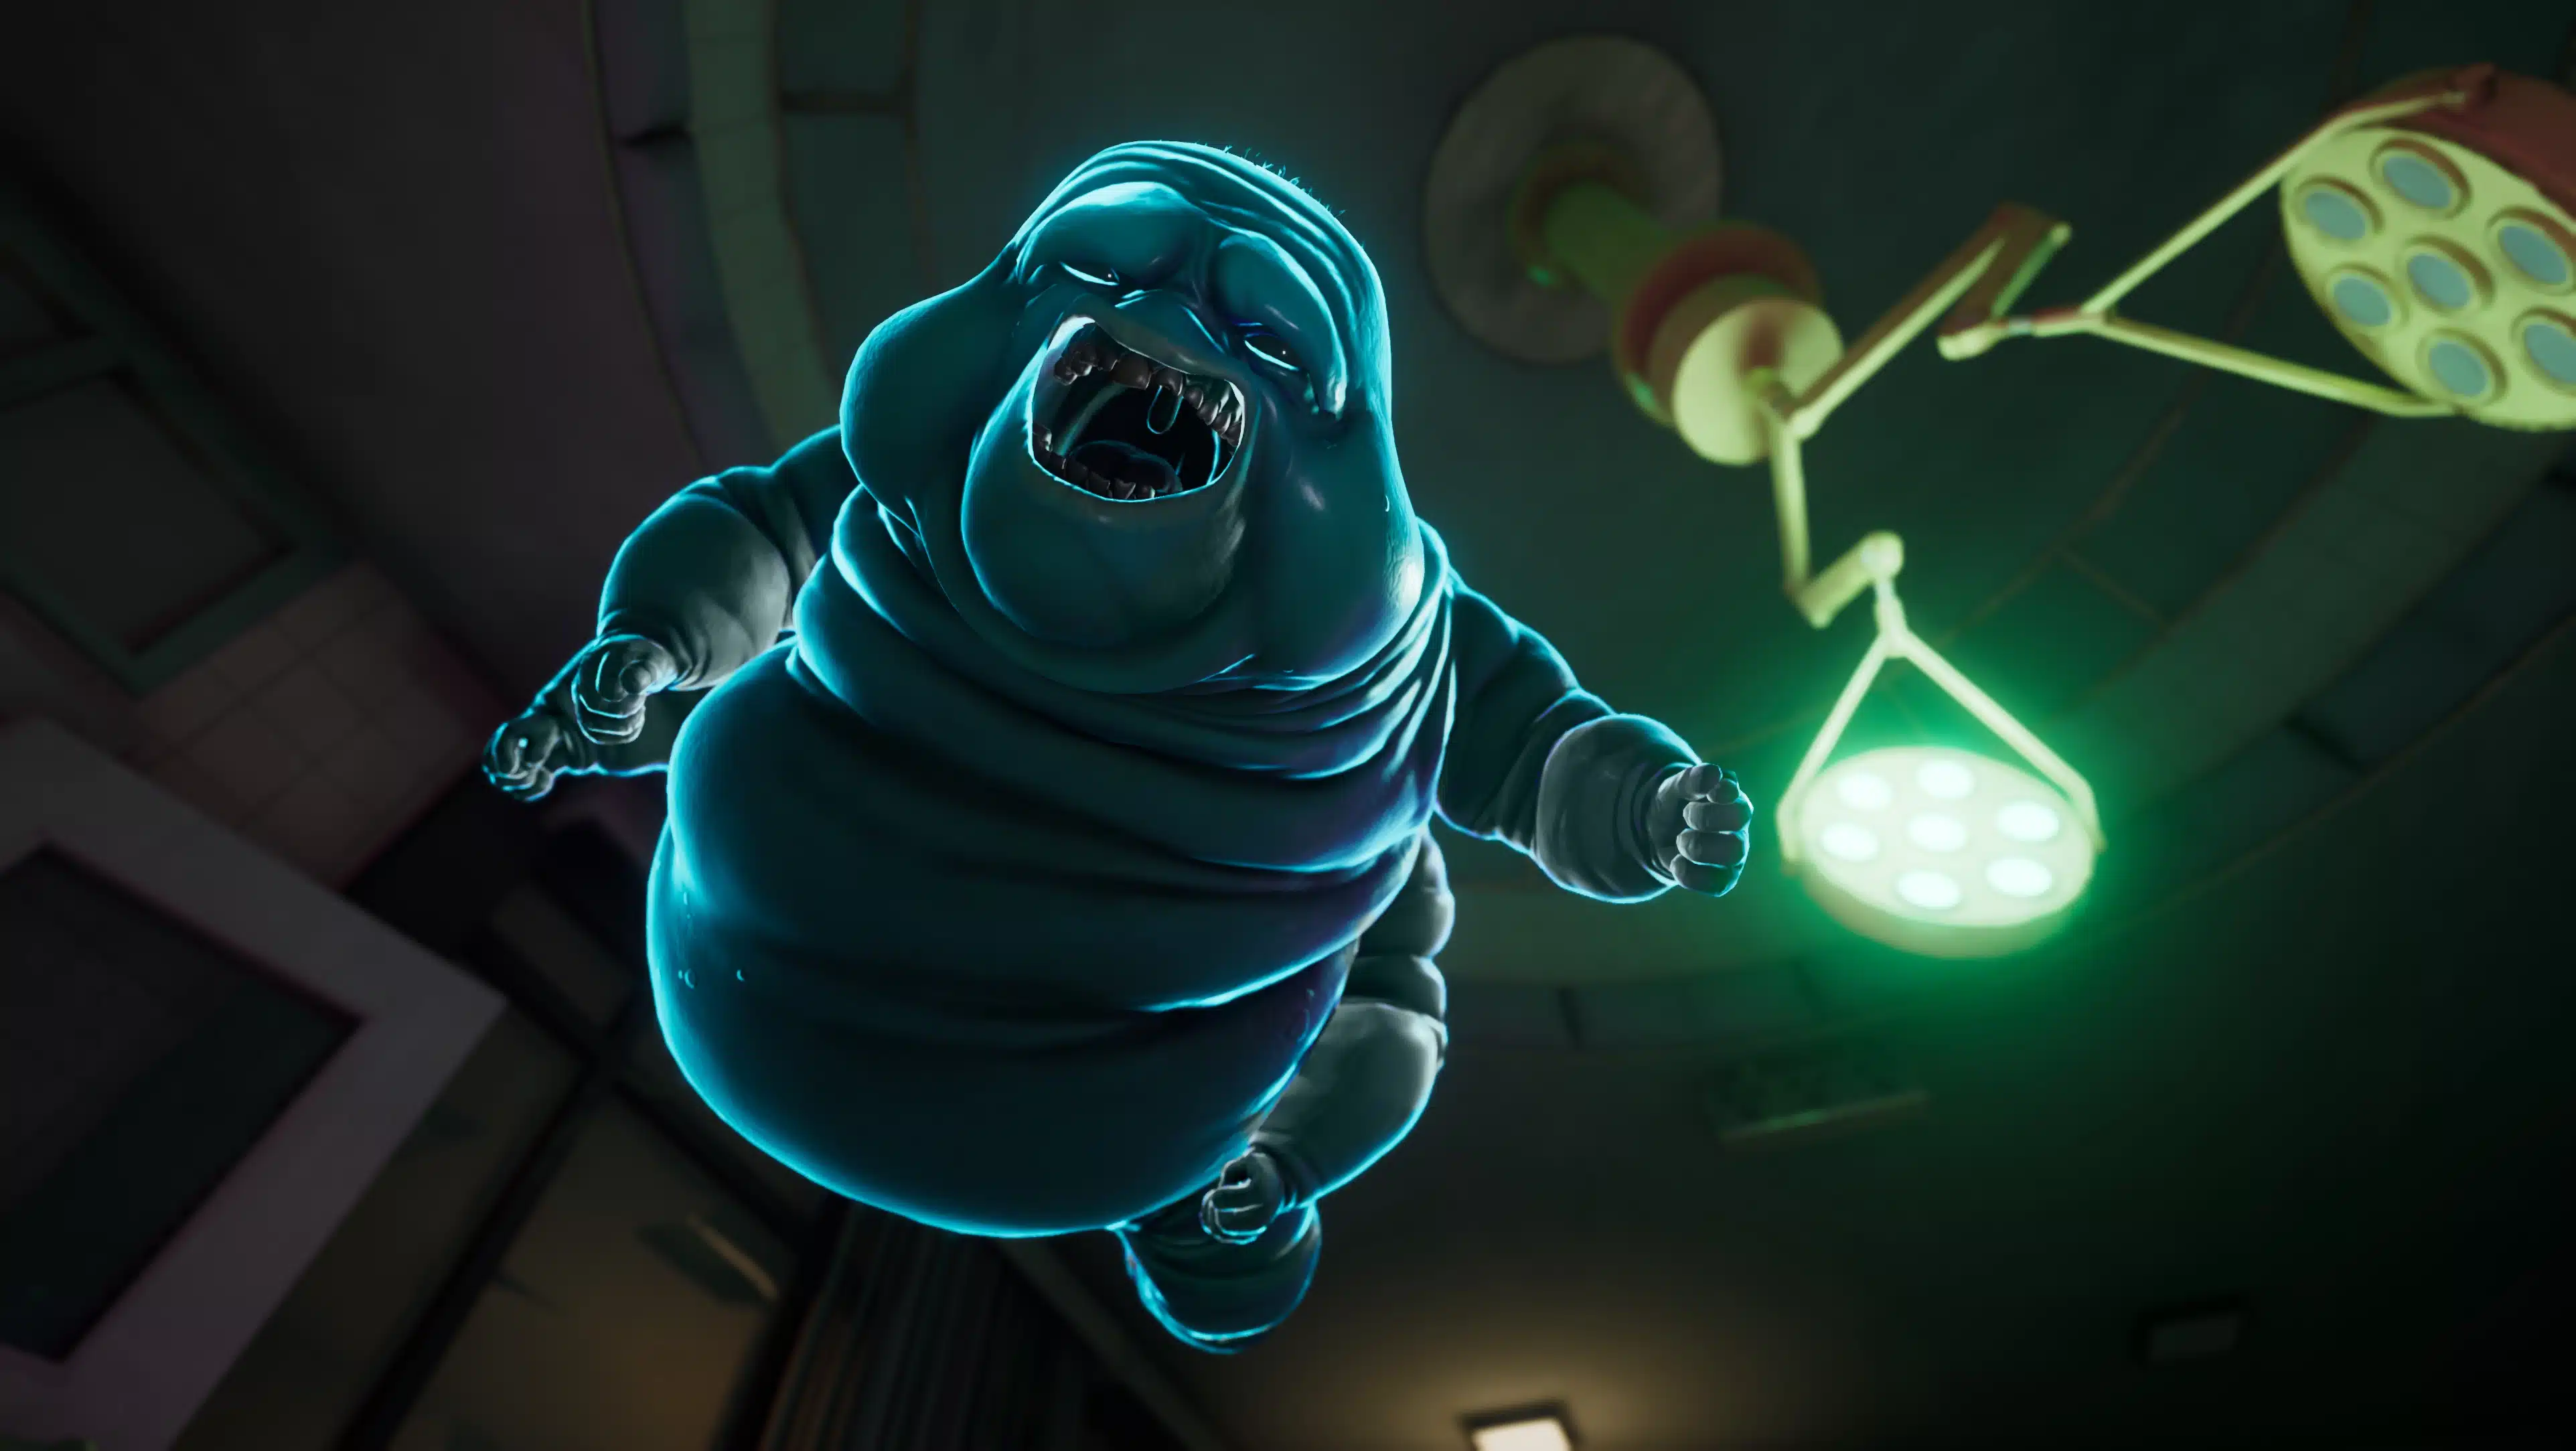 Ghostbusters spirits unleashed update 1.12